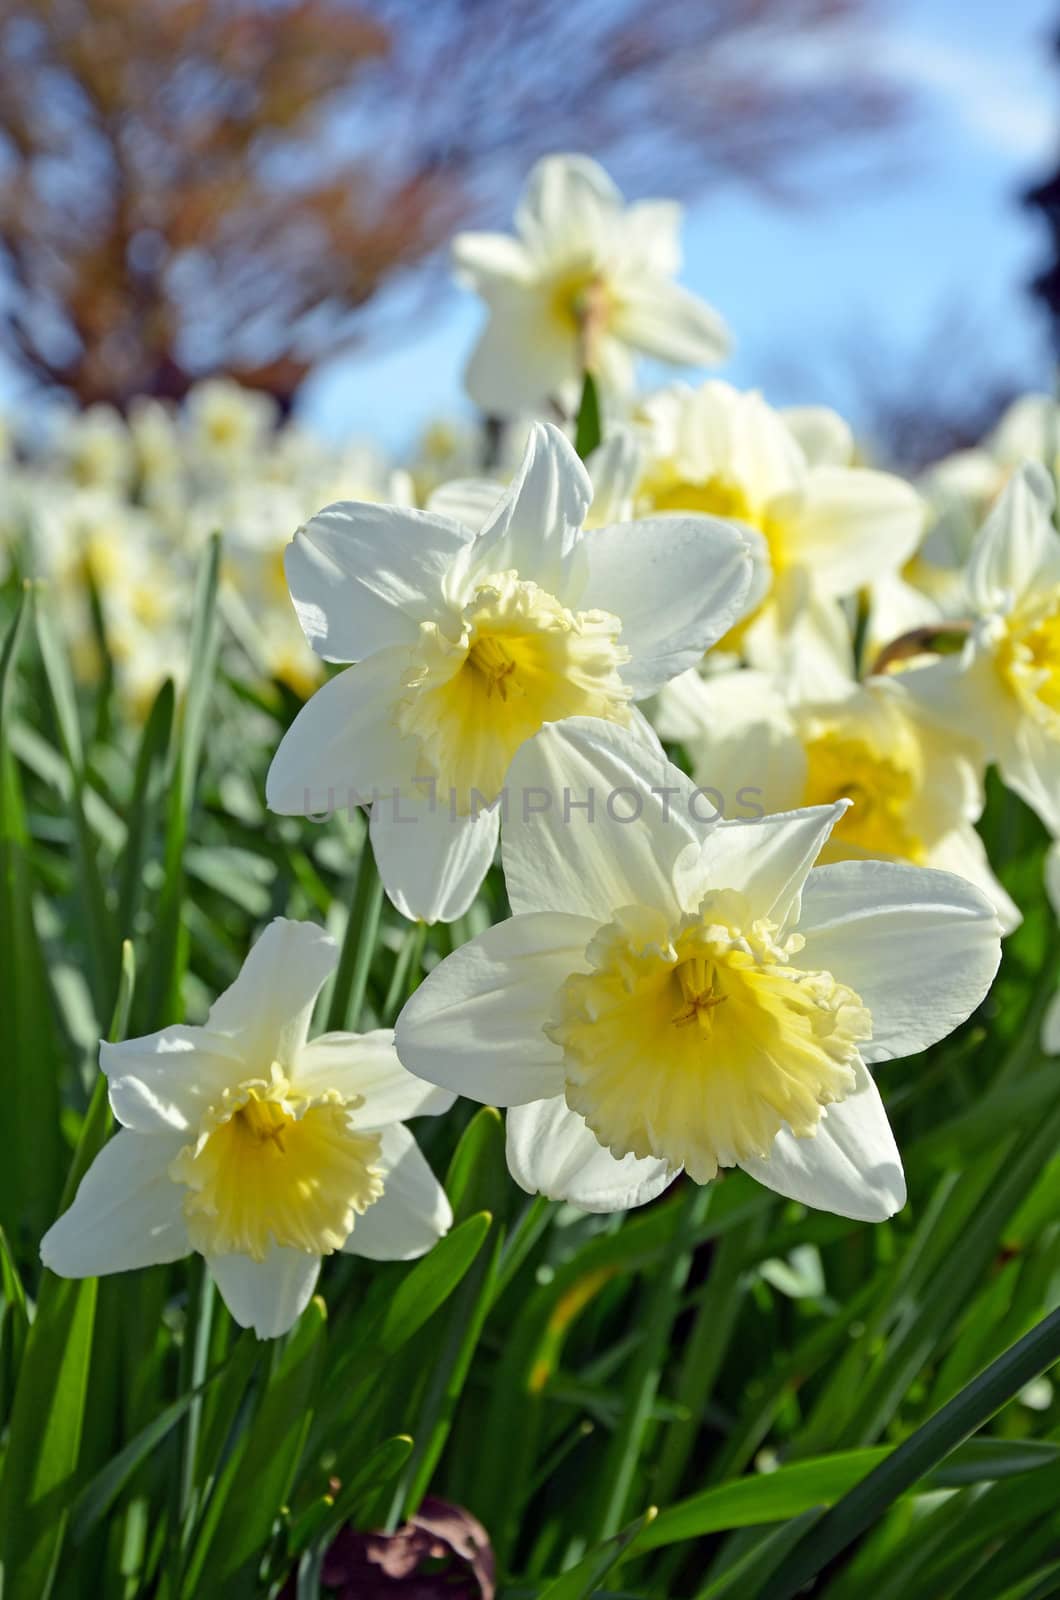 Bunch of white and yellow daffodils